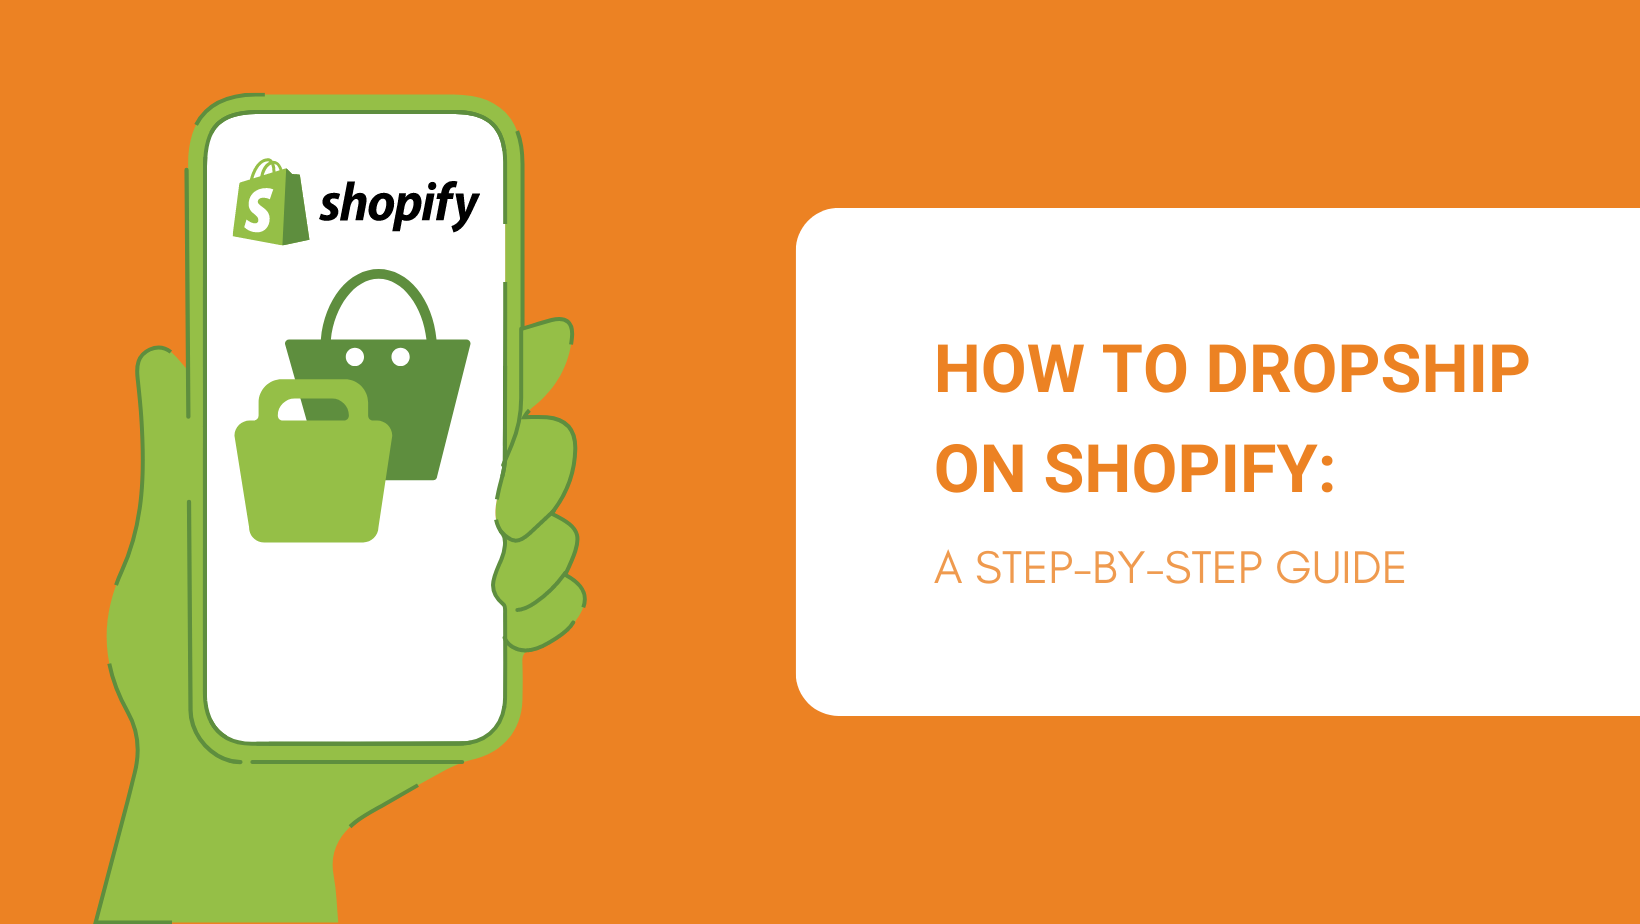 HOW TO DROPSHIP ON SHOPIFY A STEP-BY-STEP GUIDE